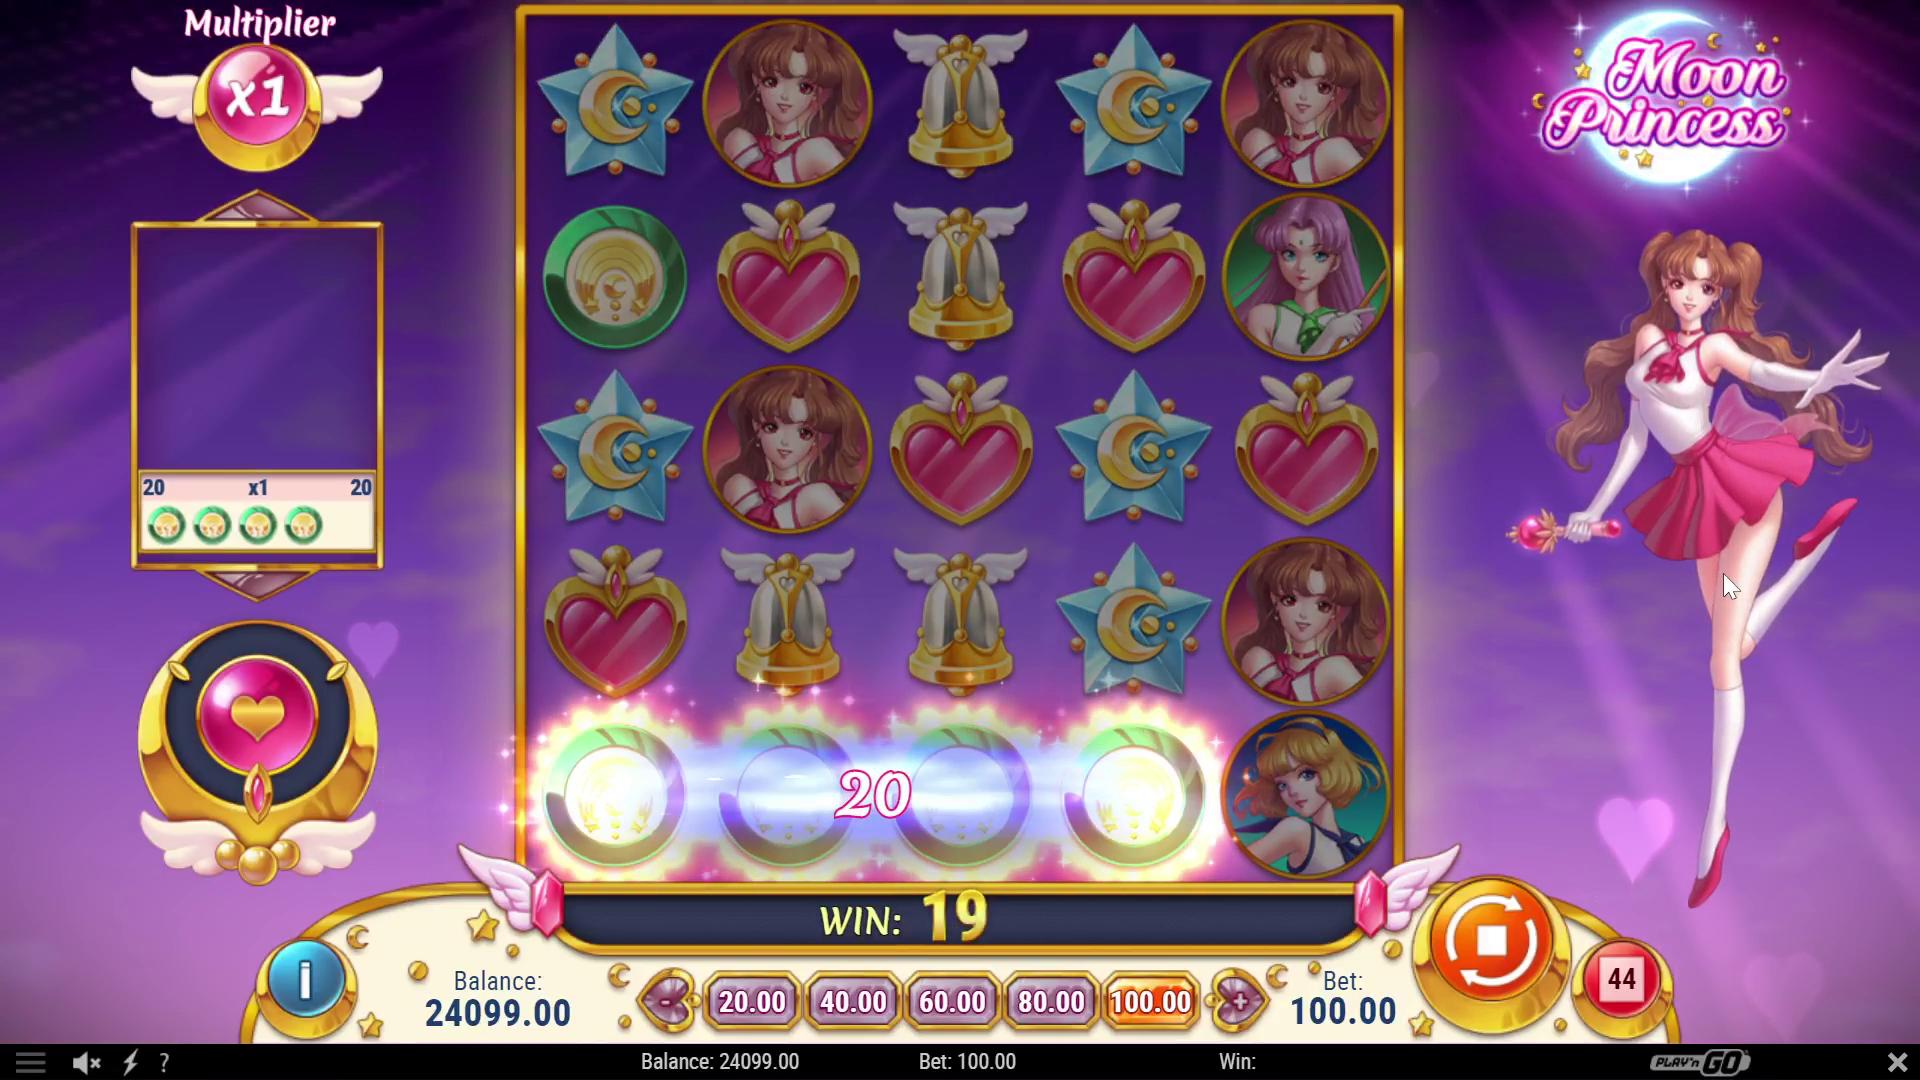 The best strategies for winning the Moon Princess slot